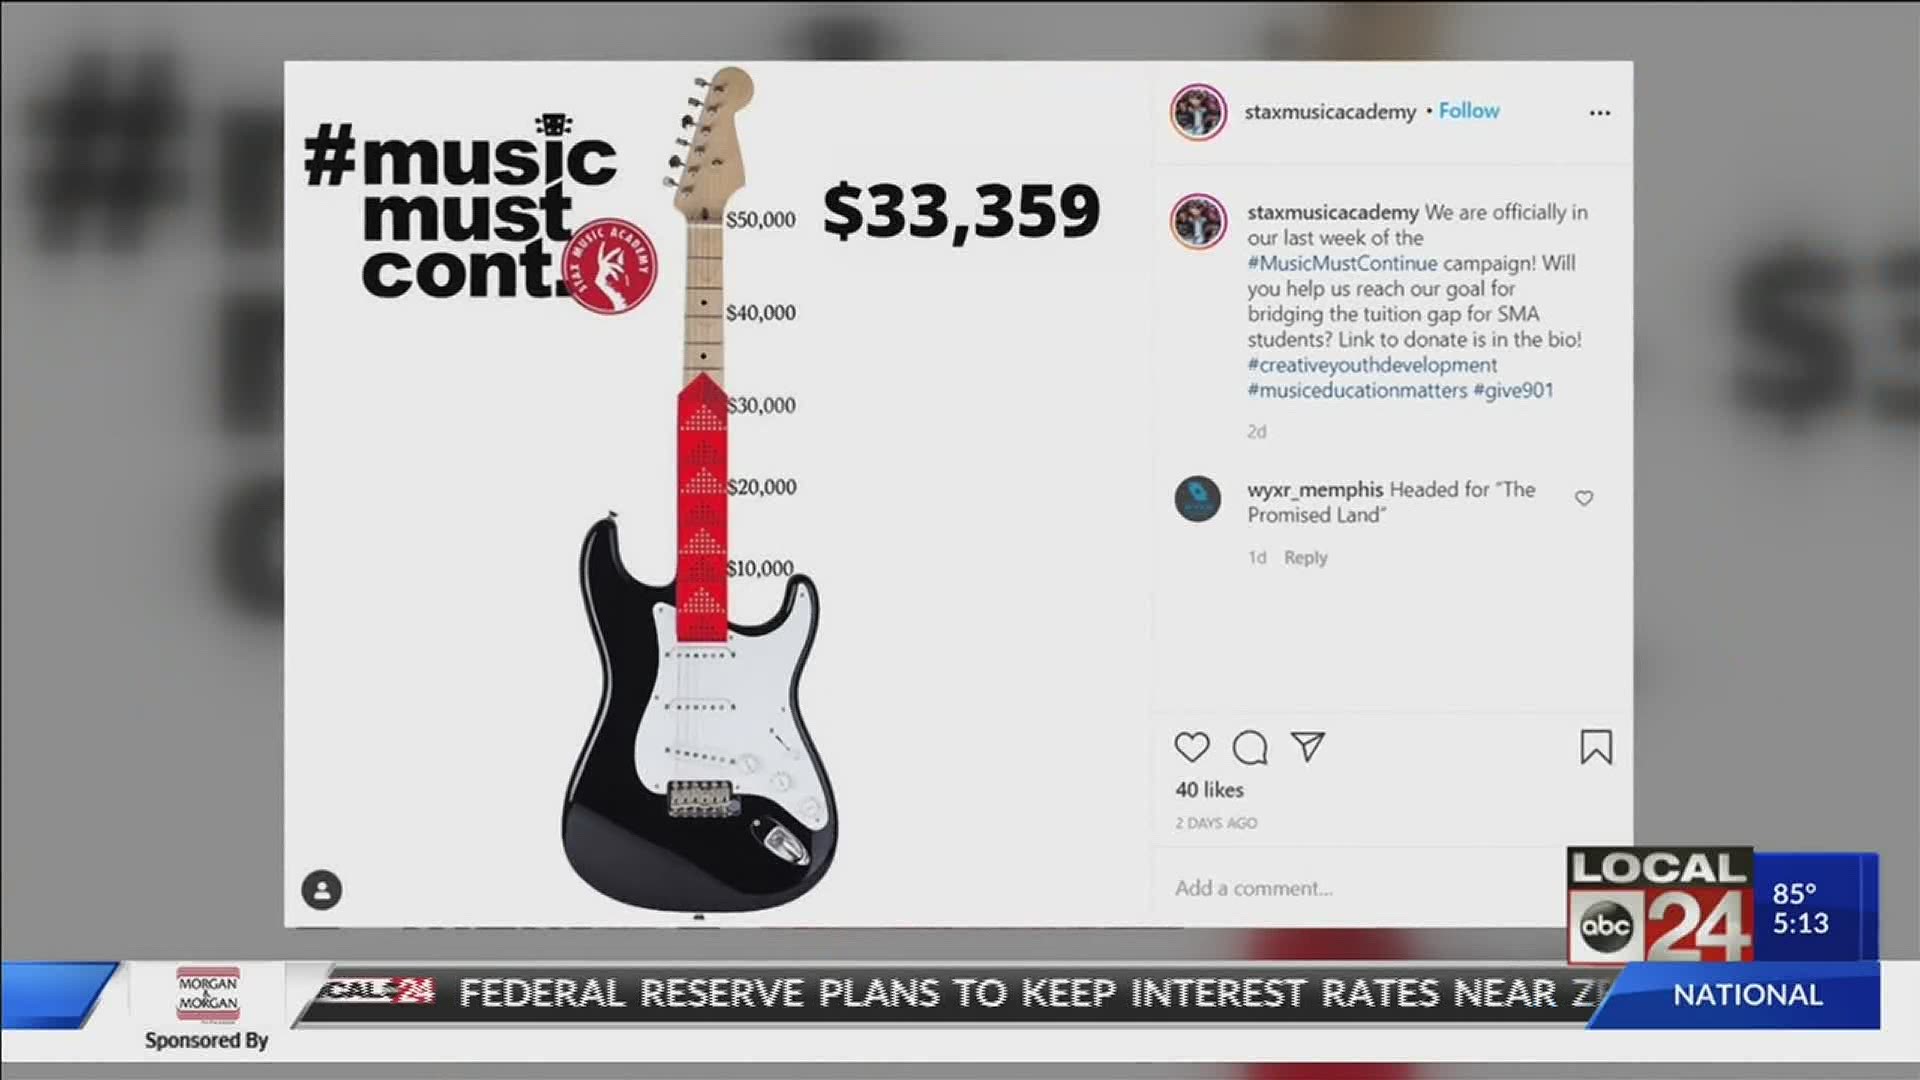 The #MusicMustContinue fundraiser has a goal to raise $50,000 to help with tuition costs.